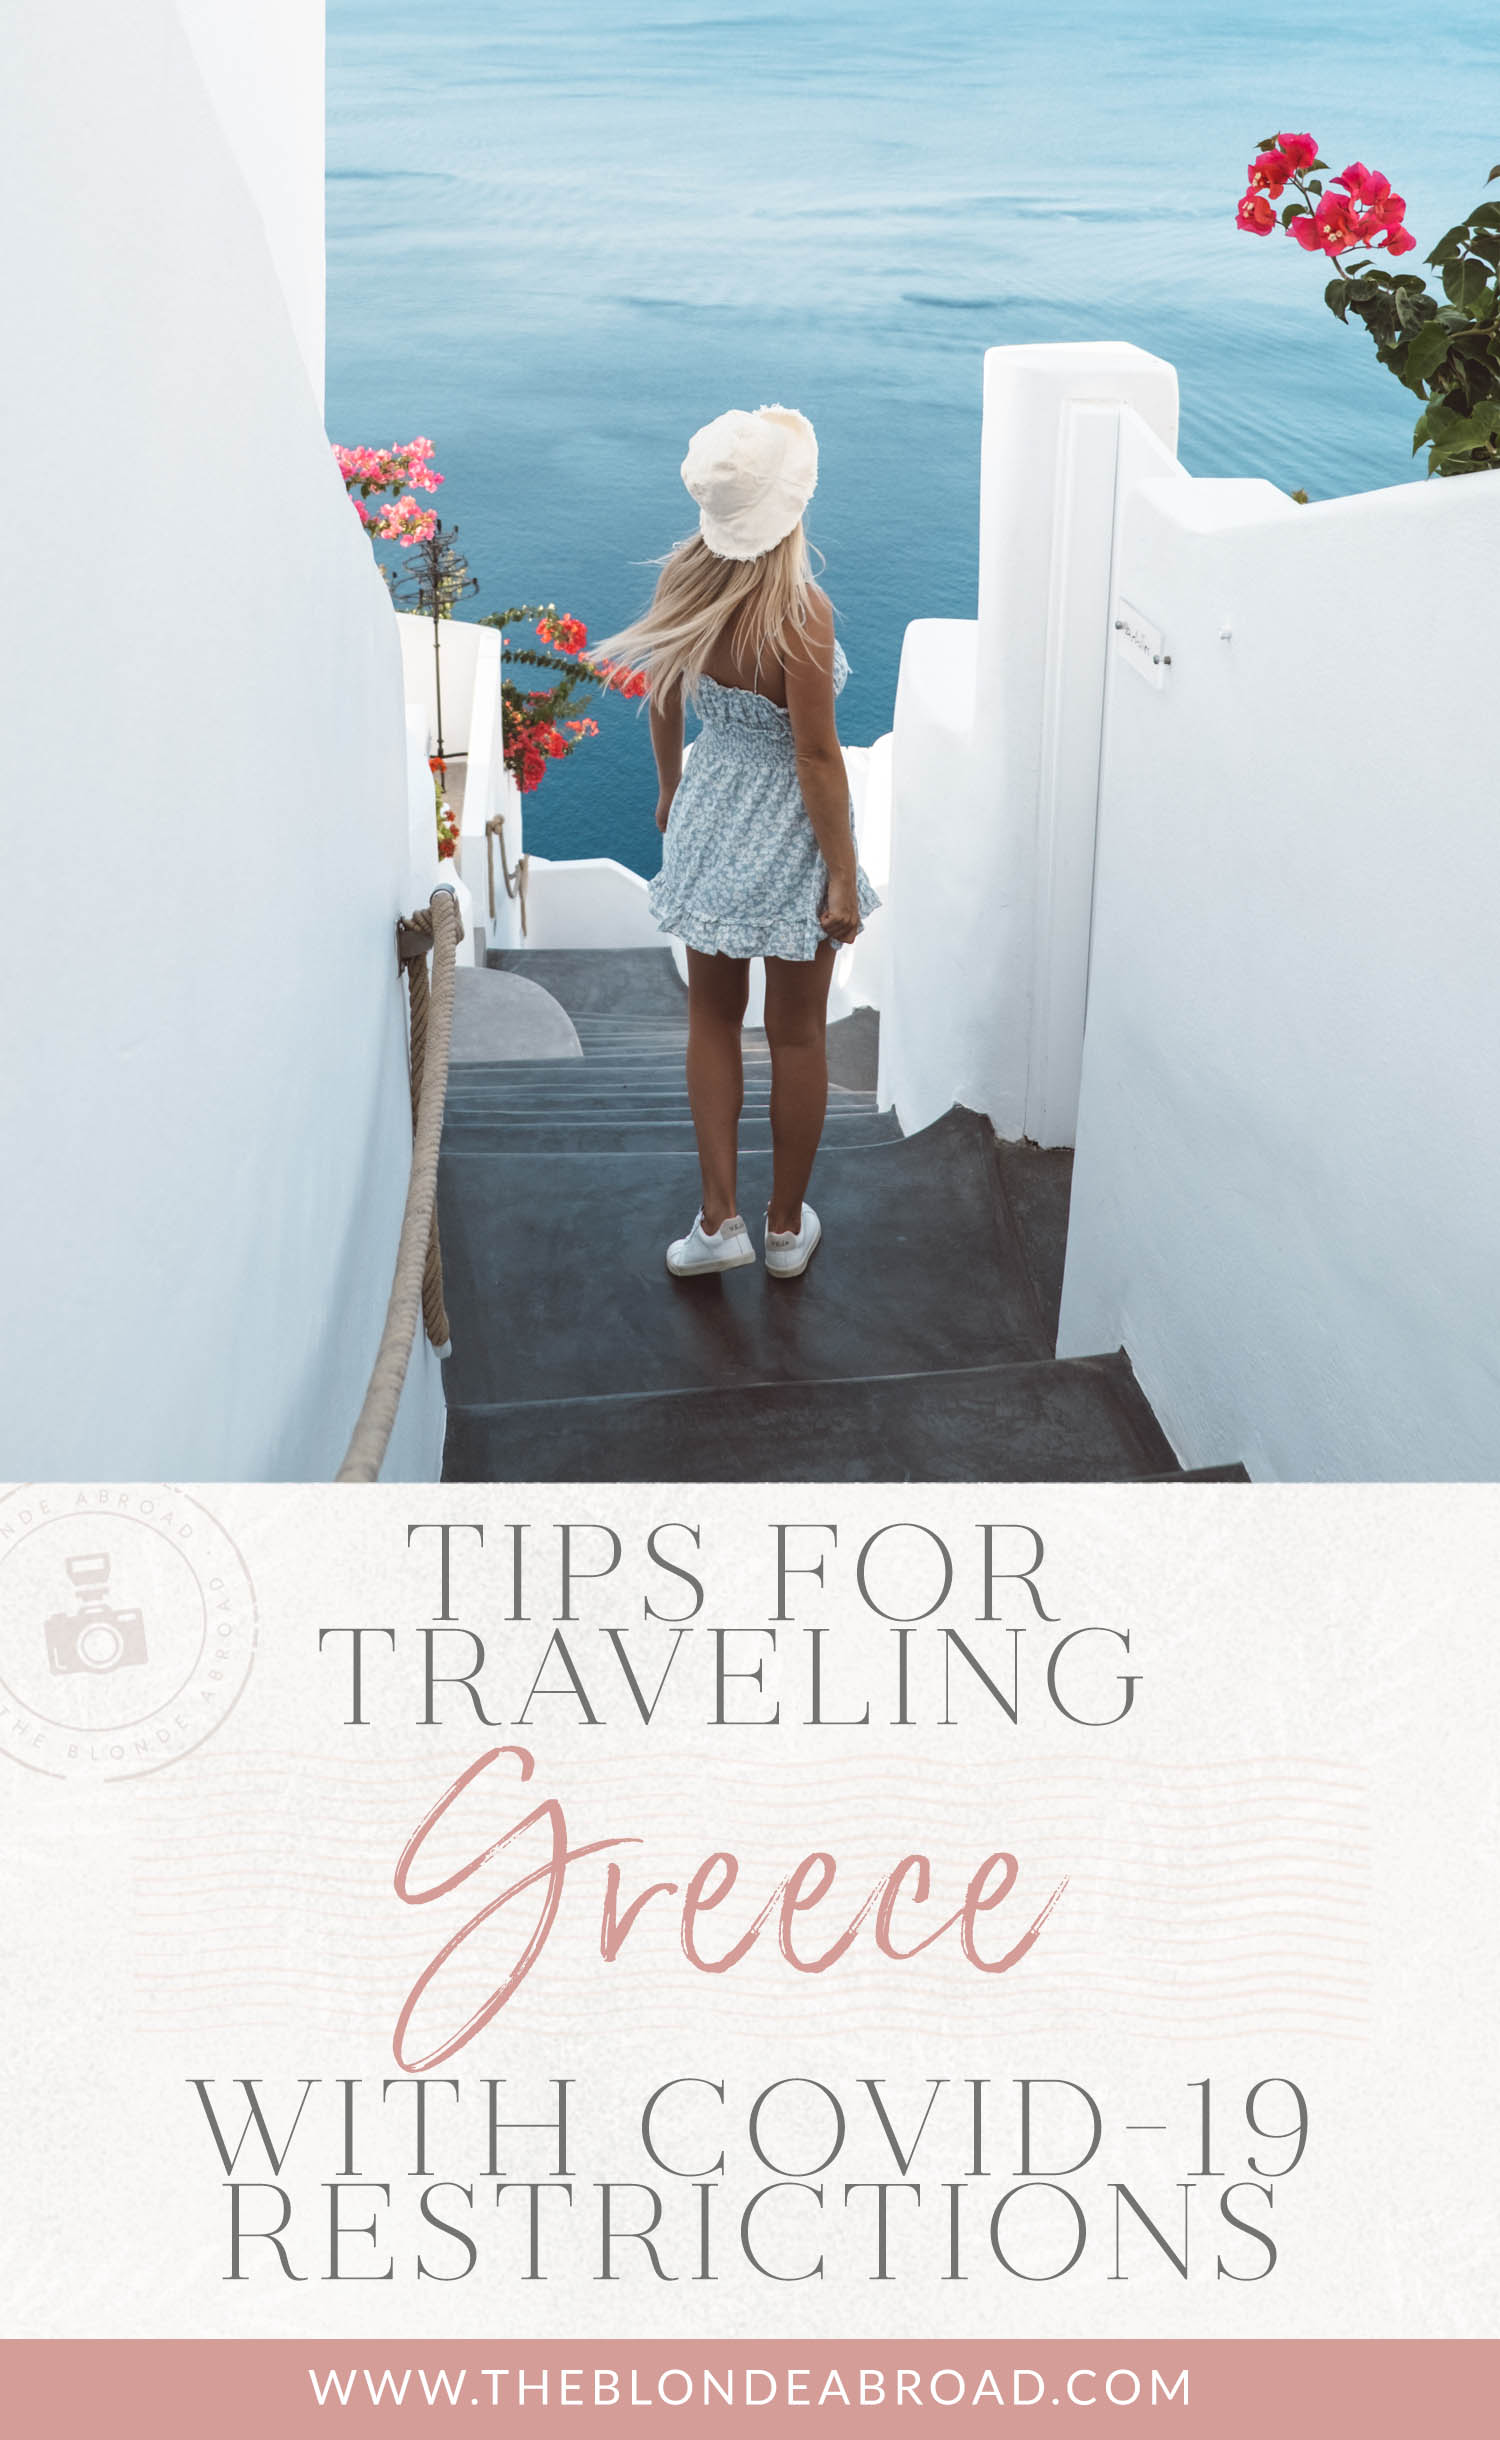 Tips for Traveling Greece Covid Restrictions